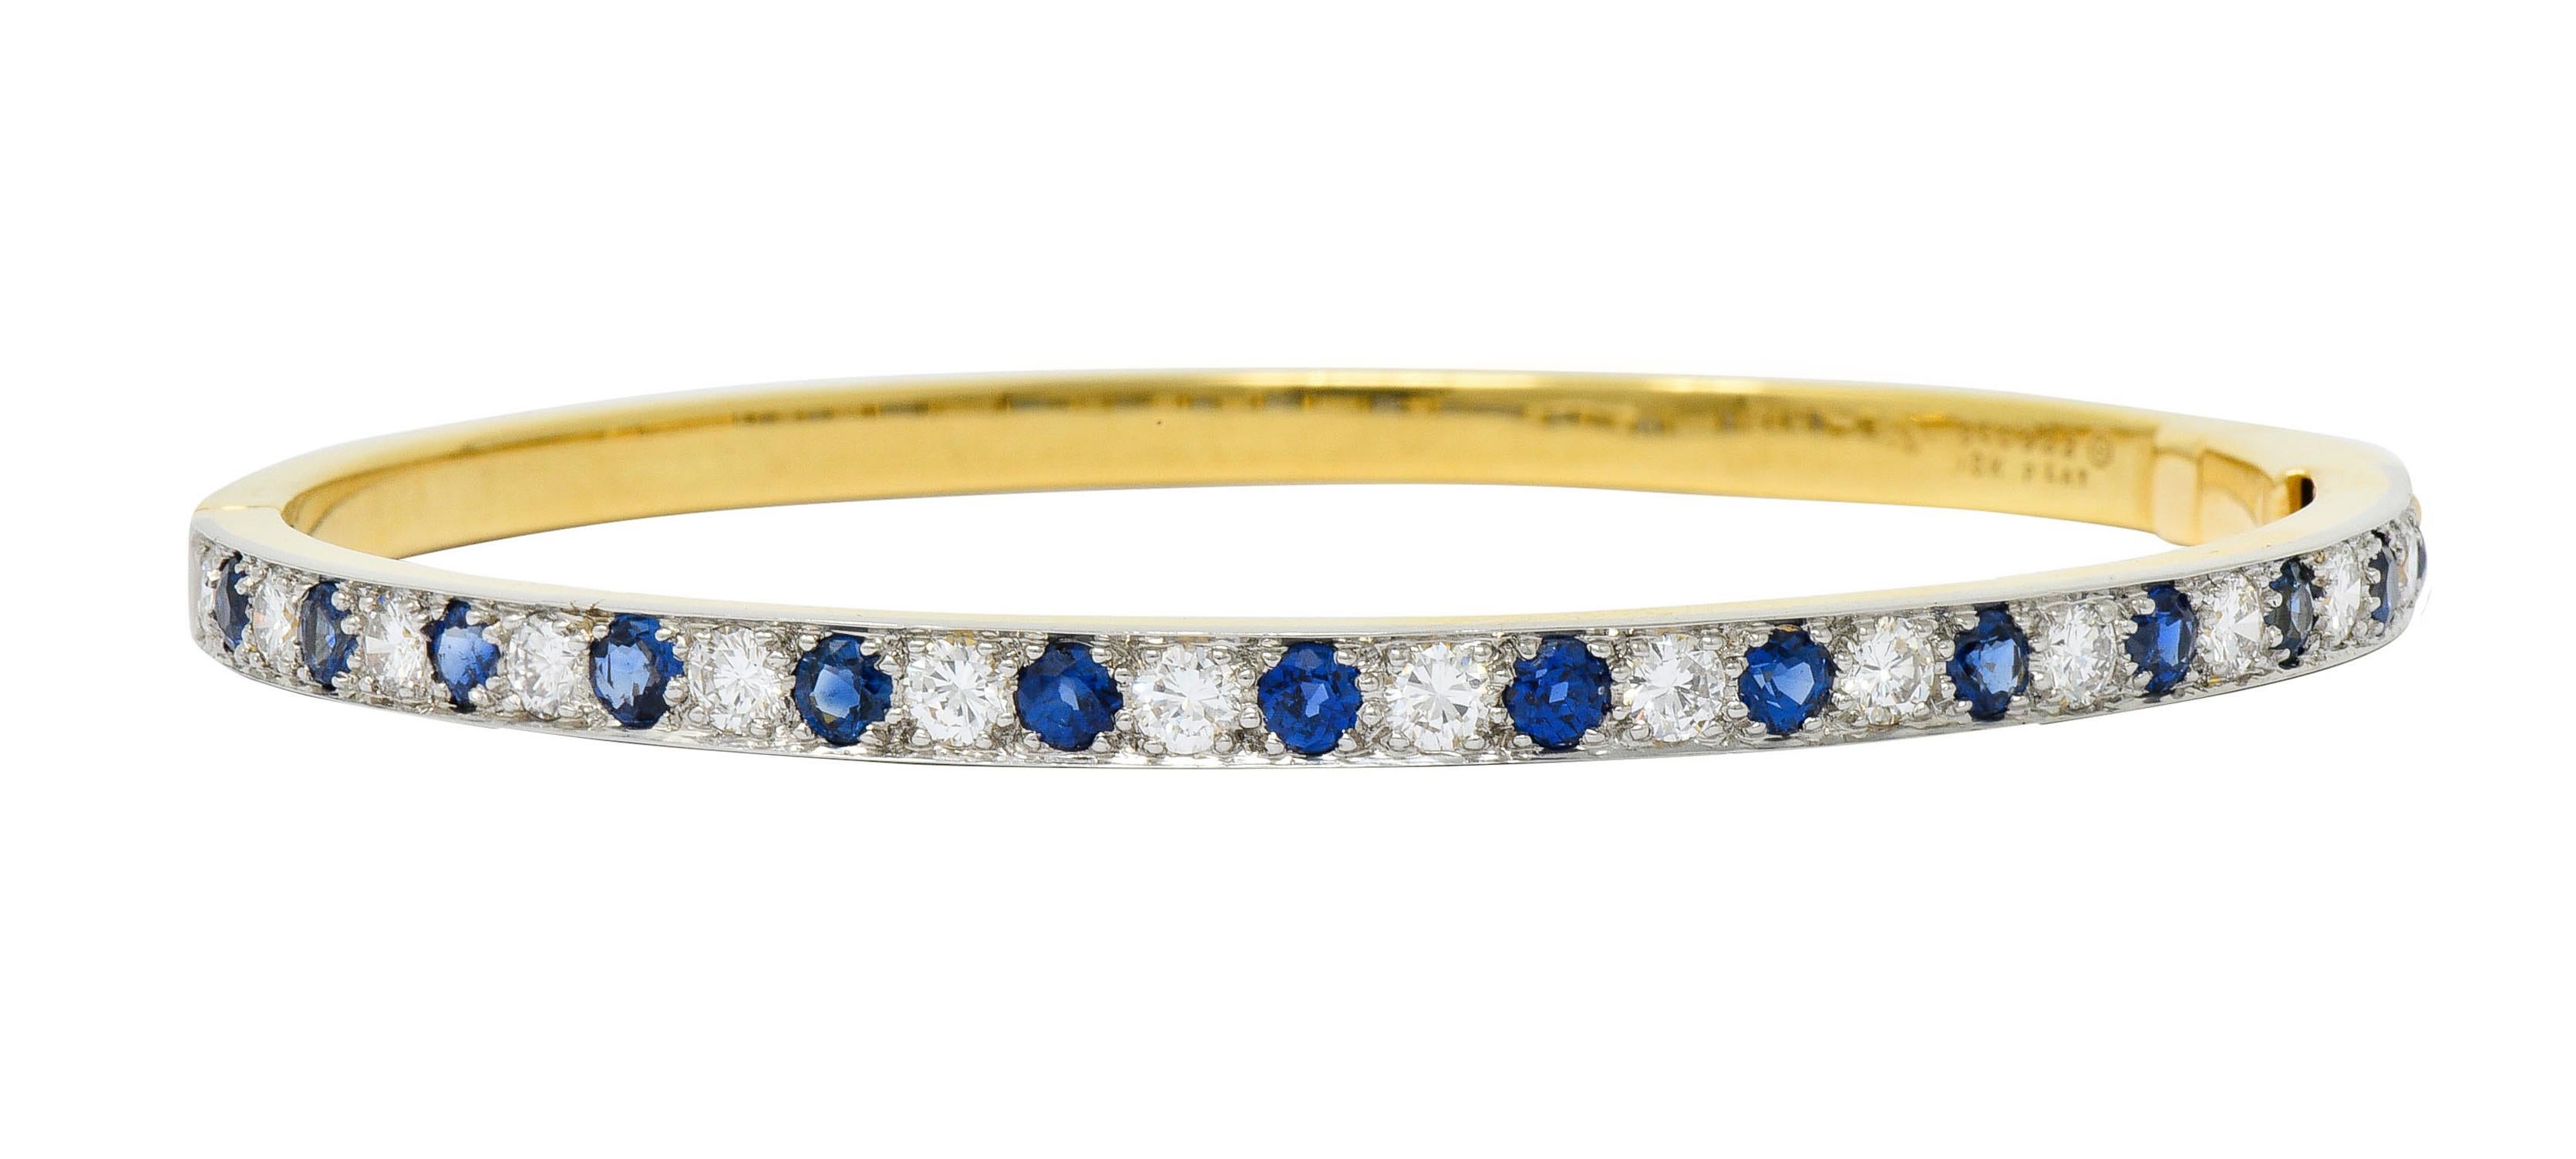 18 karat gold hinged bangle bracelet featuring a platinum top

Bead set with round brilliant cut diamonds and round cut sapphire, alternating

Total diamond weight is approximately 1.50 carats with G/H color and VS clarity

Sapphires are a very-well